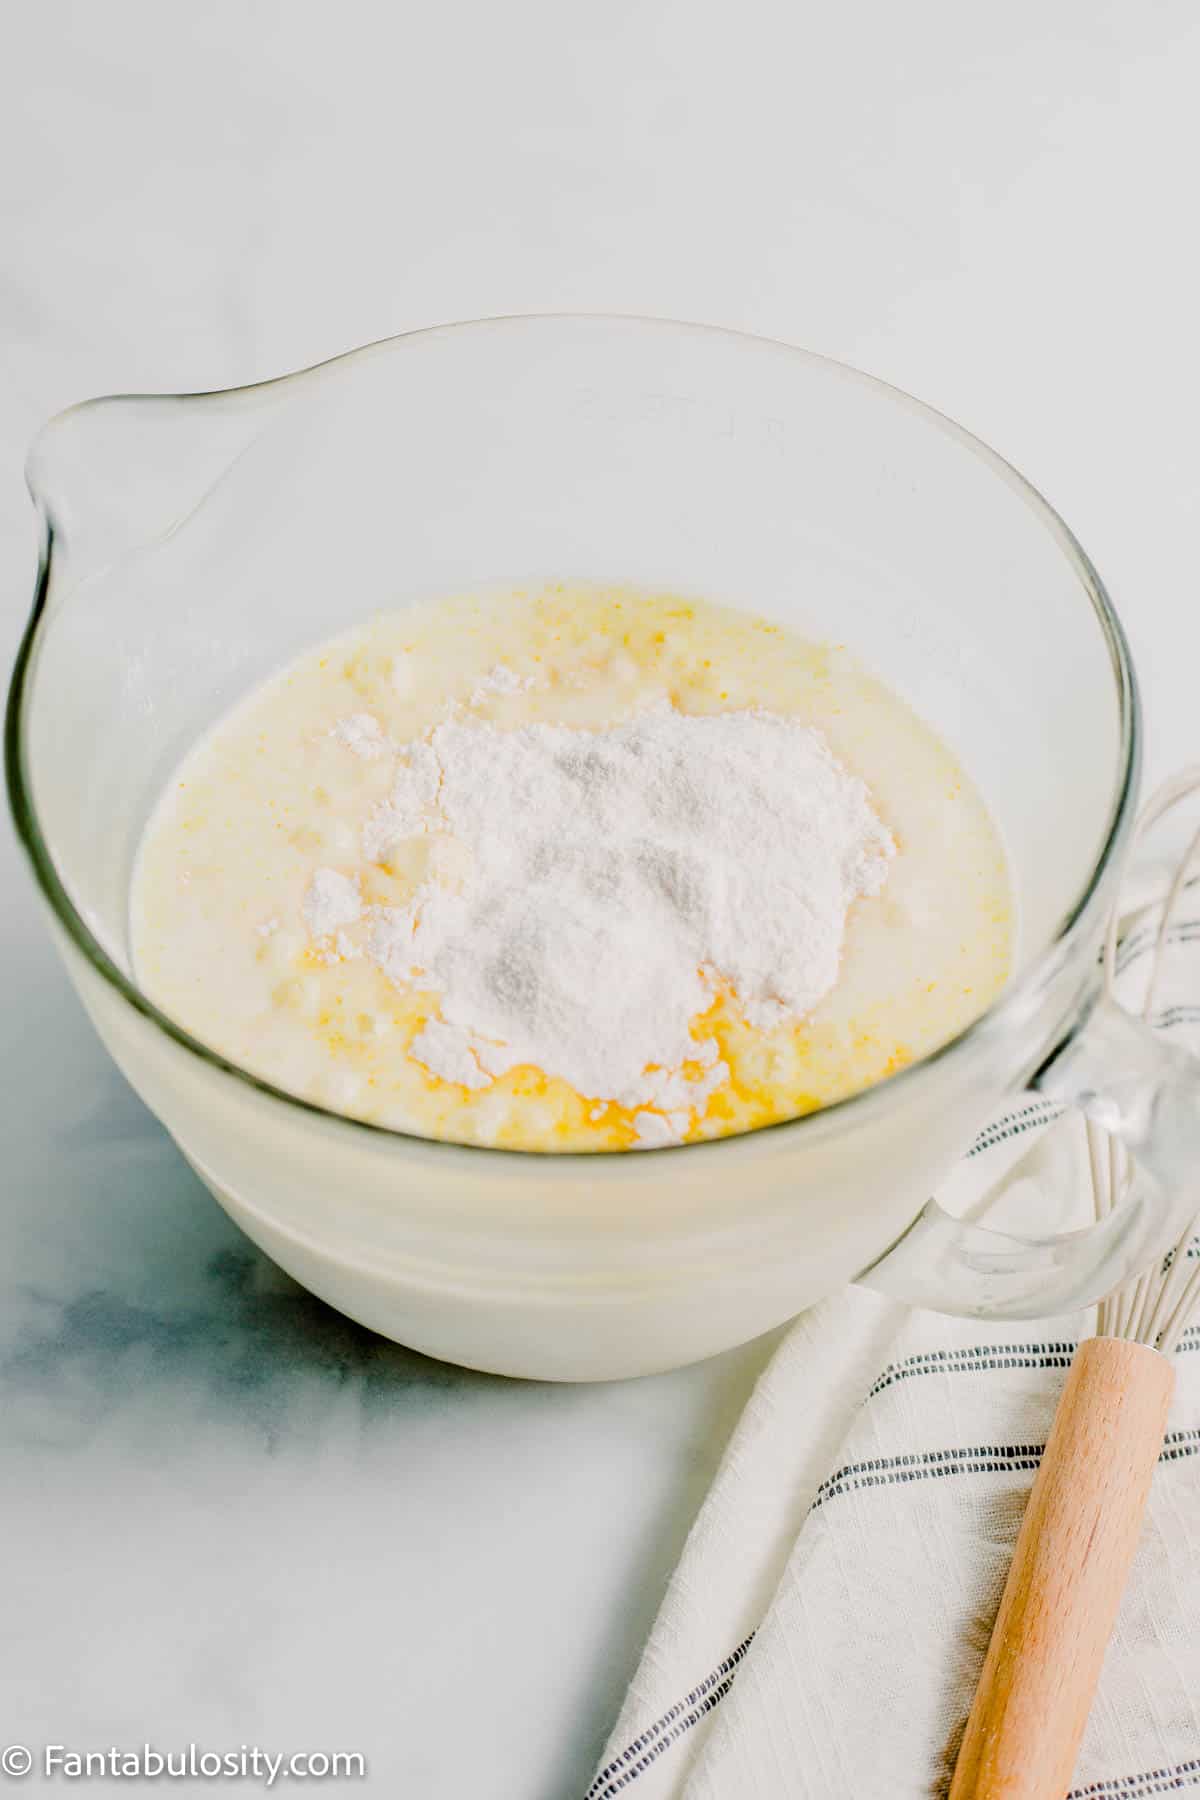 Pudding mixture - in mixing bowl